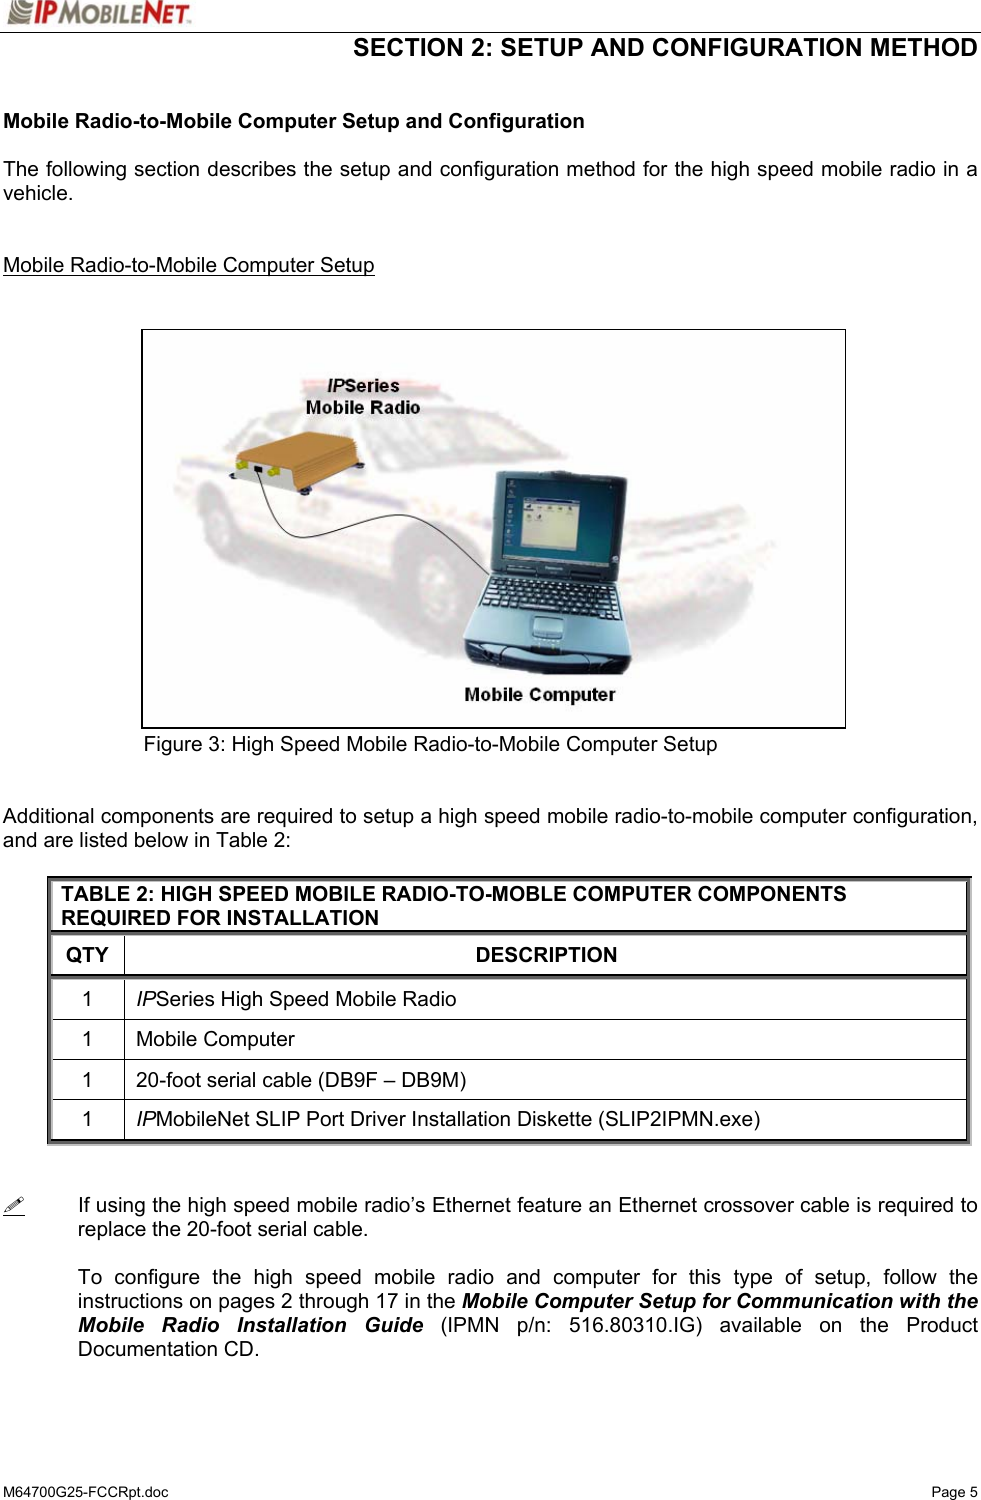  SECTION 2: SETUP AND CONFIGURATION METHOD  M64700G25-FCCRpt.doc   Page 5  Mobile Radio-to-Mobile Computer Setup and Configuration  The following section describes the setup and configuration method for the high speed mobile radio in a vehicle.     Mobile Radio-to-Mobile Computer Setup                    Figure 3: High Speed Mobile Radio-to-Mobile Computer Setup   Additional components are required to setup a high speed mobile radio-to-mobile computer configuration, and are listed below in Table 2:  TABLE 2: HIGH SPEED MOBILE RADIO-TO-MOBLE COMPUTER COMPONENTS REQUIRED FOR INSTALLATION QTY DESCRIPTION 1  IPSeries High Speed Mobile Radio 1 Mobile Computer 1  20-foot serial cable (DB9F – DB9M) 1  IPMobileNet SLIP Port Driver Installation Diskette (SLIP2IPMN.exe)     If using the high speed mobile radio’s Ethernet feature an Ethernet crossover cable is required to replace the 20-foot serial cable.  To configure the high speed mobile radio and computer for this type of setup, follow the instructions on pages 2 through 17 in the Mobile Computer Setup for Communication with the Mobile Radio Installation Guide (IPMN p/n: 516.80310.IG) available on the Product Documentation CD.   